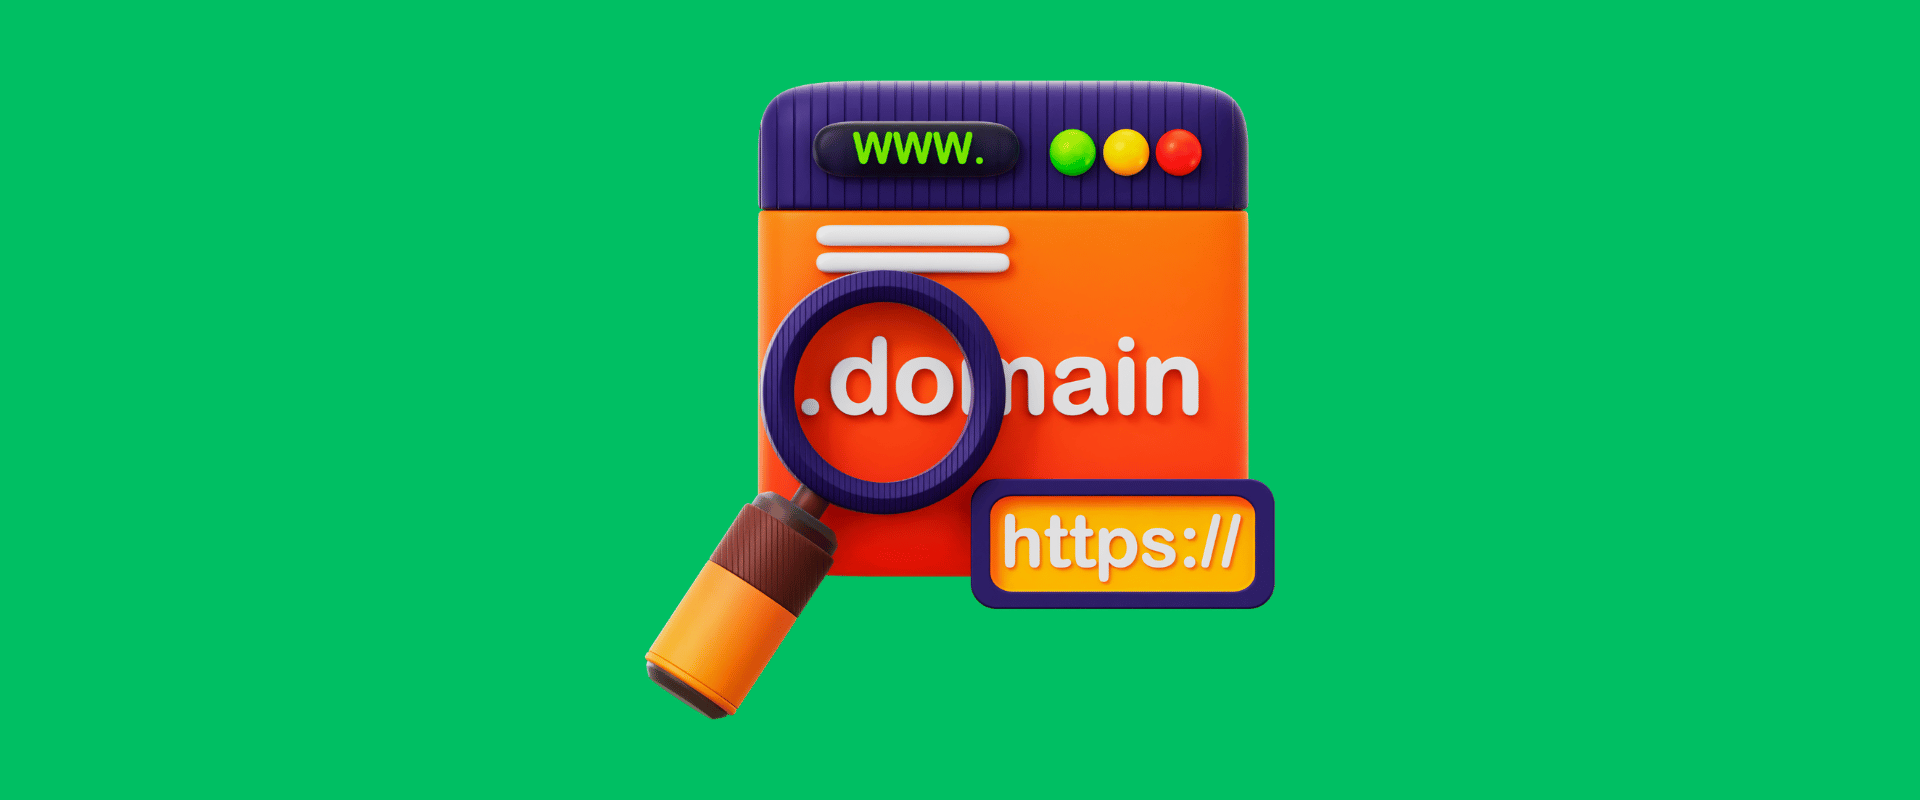 How To Buy A Domain Name